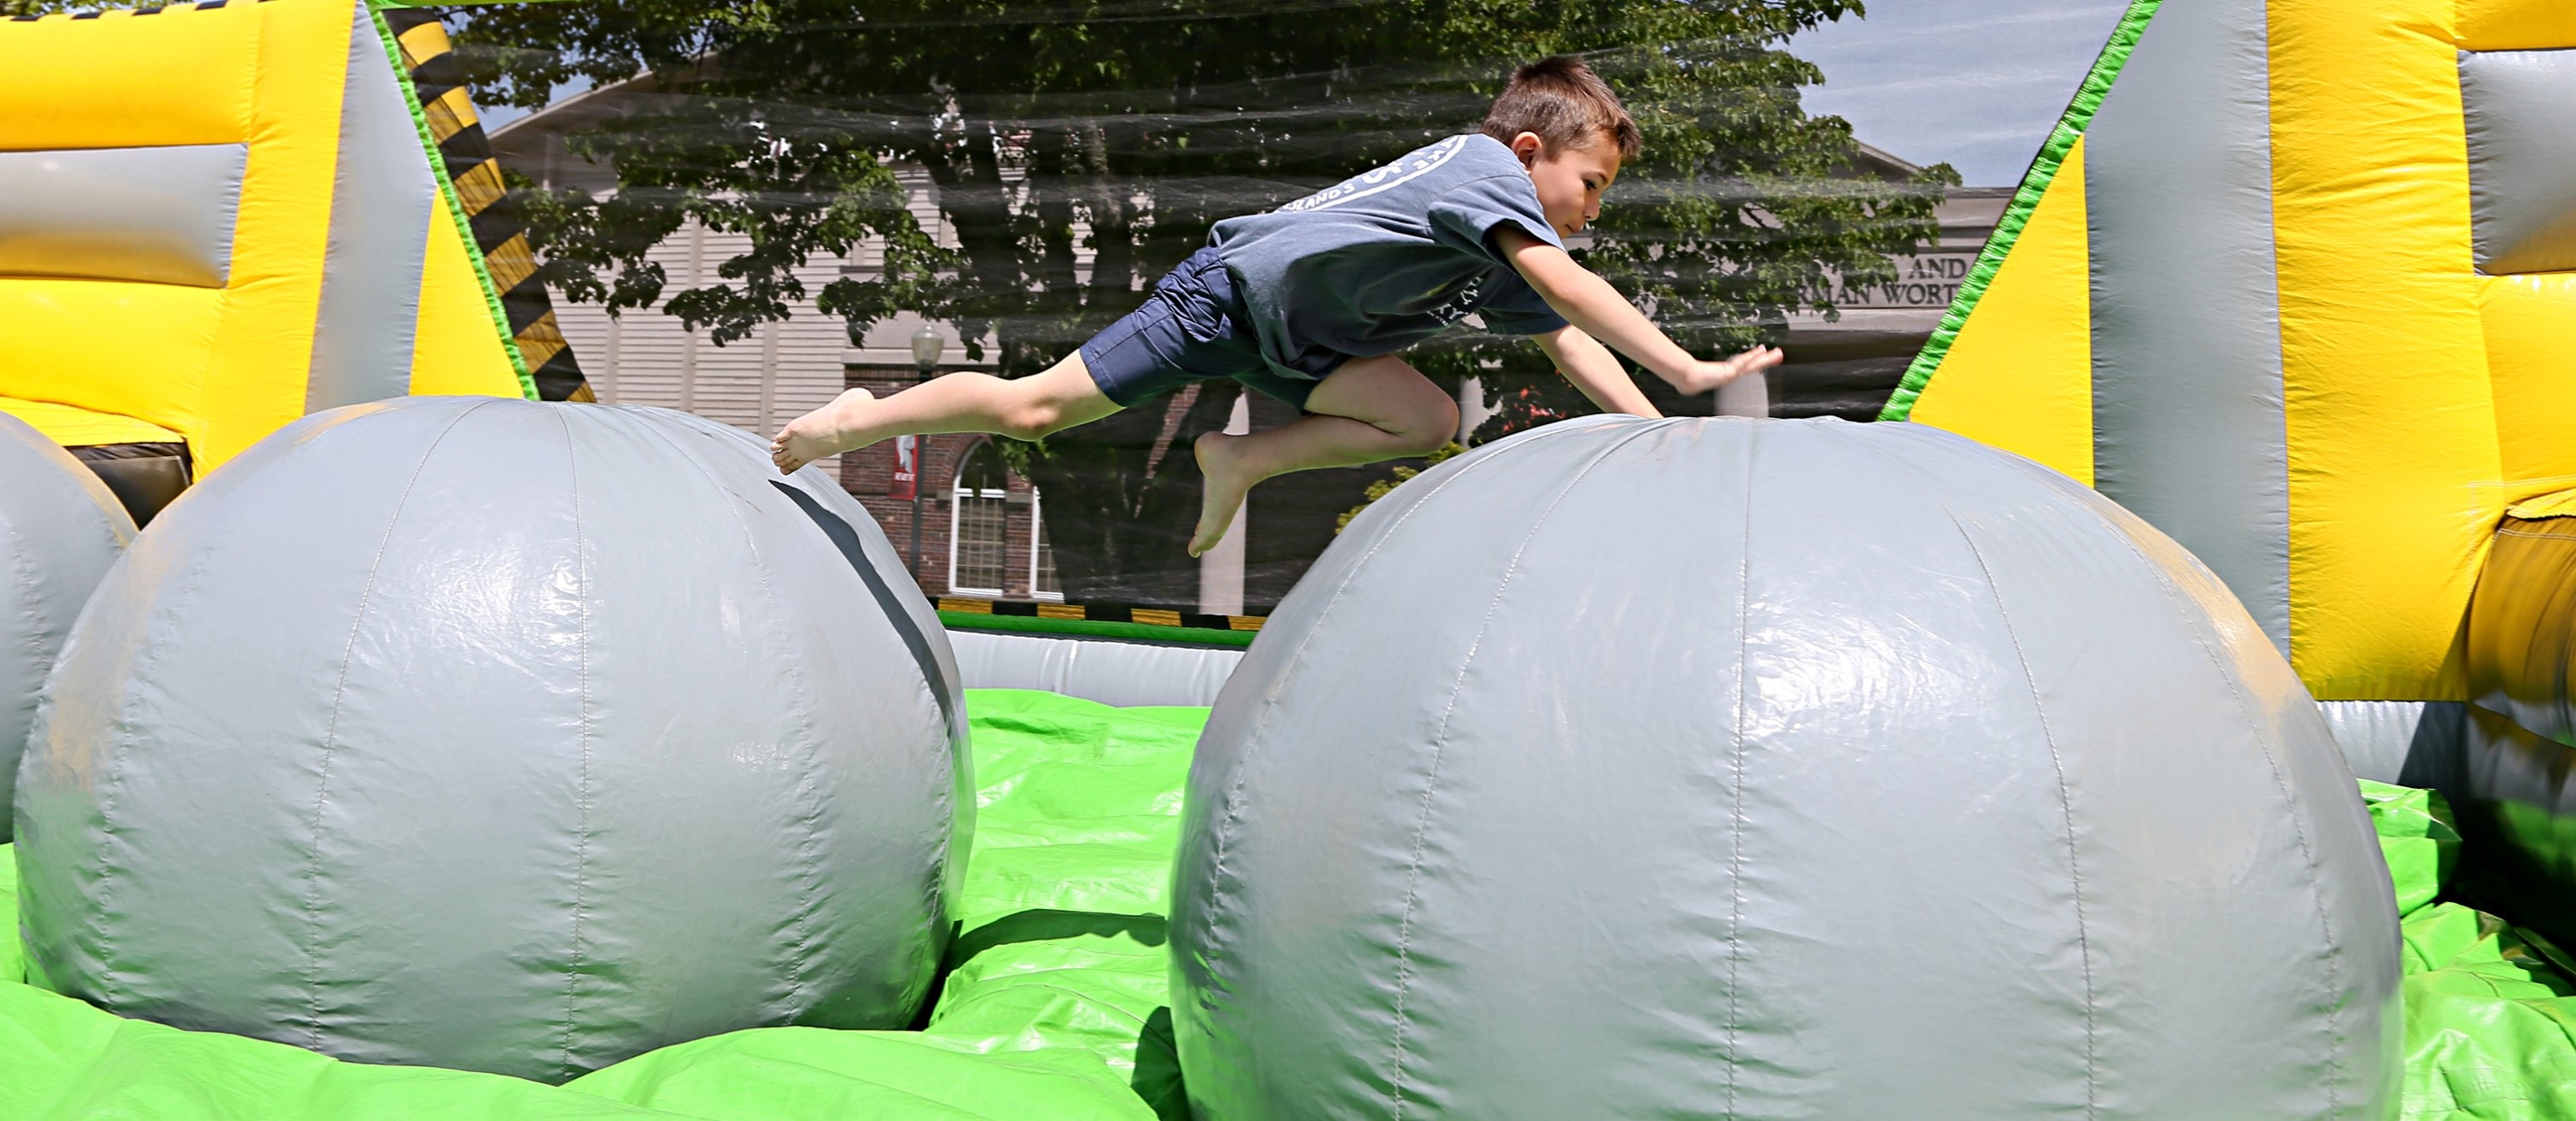 Leaps and Bounds Obstacle Course